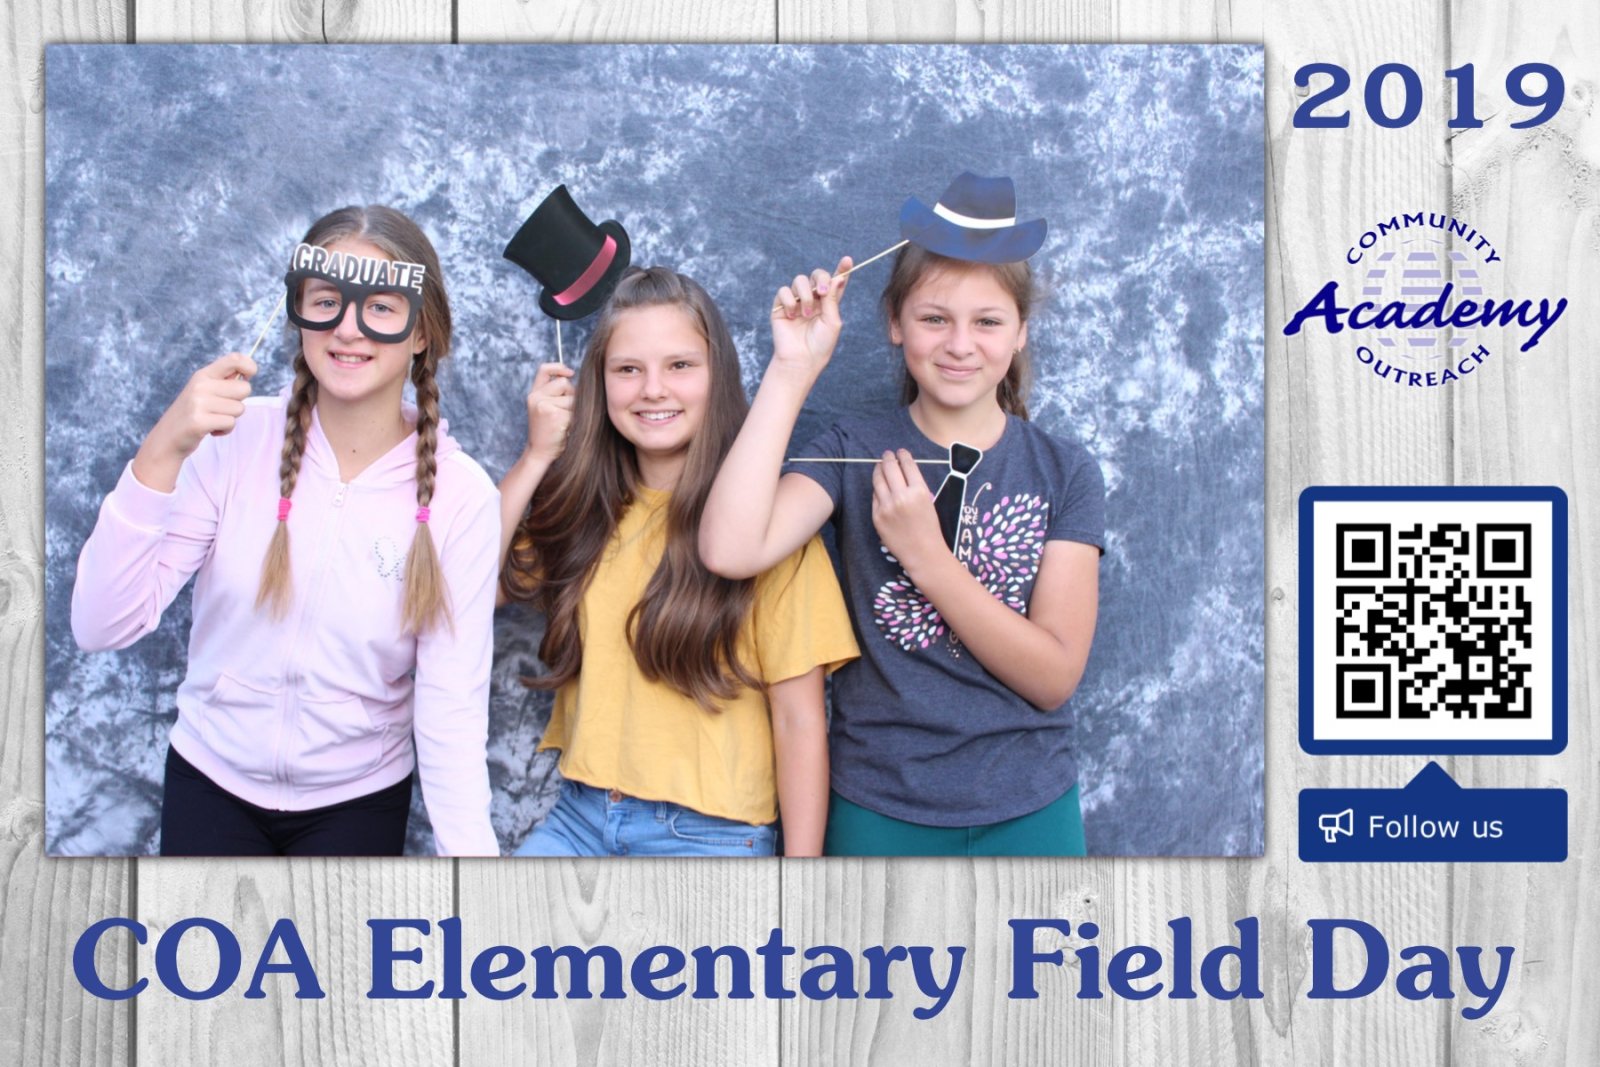 Photo-booth 2019 - Field Day